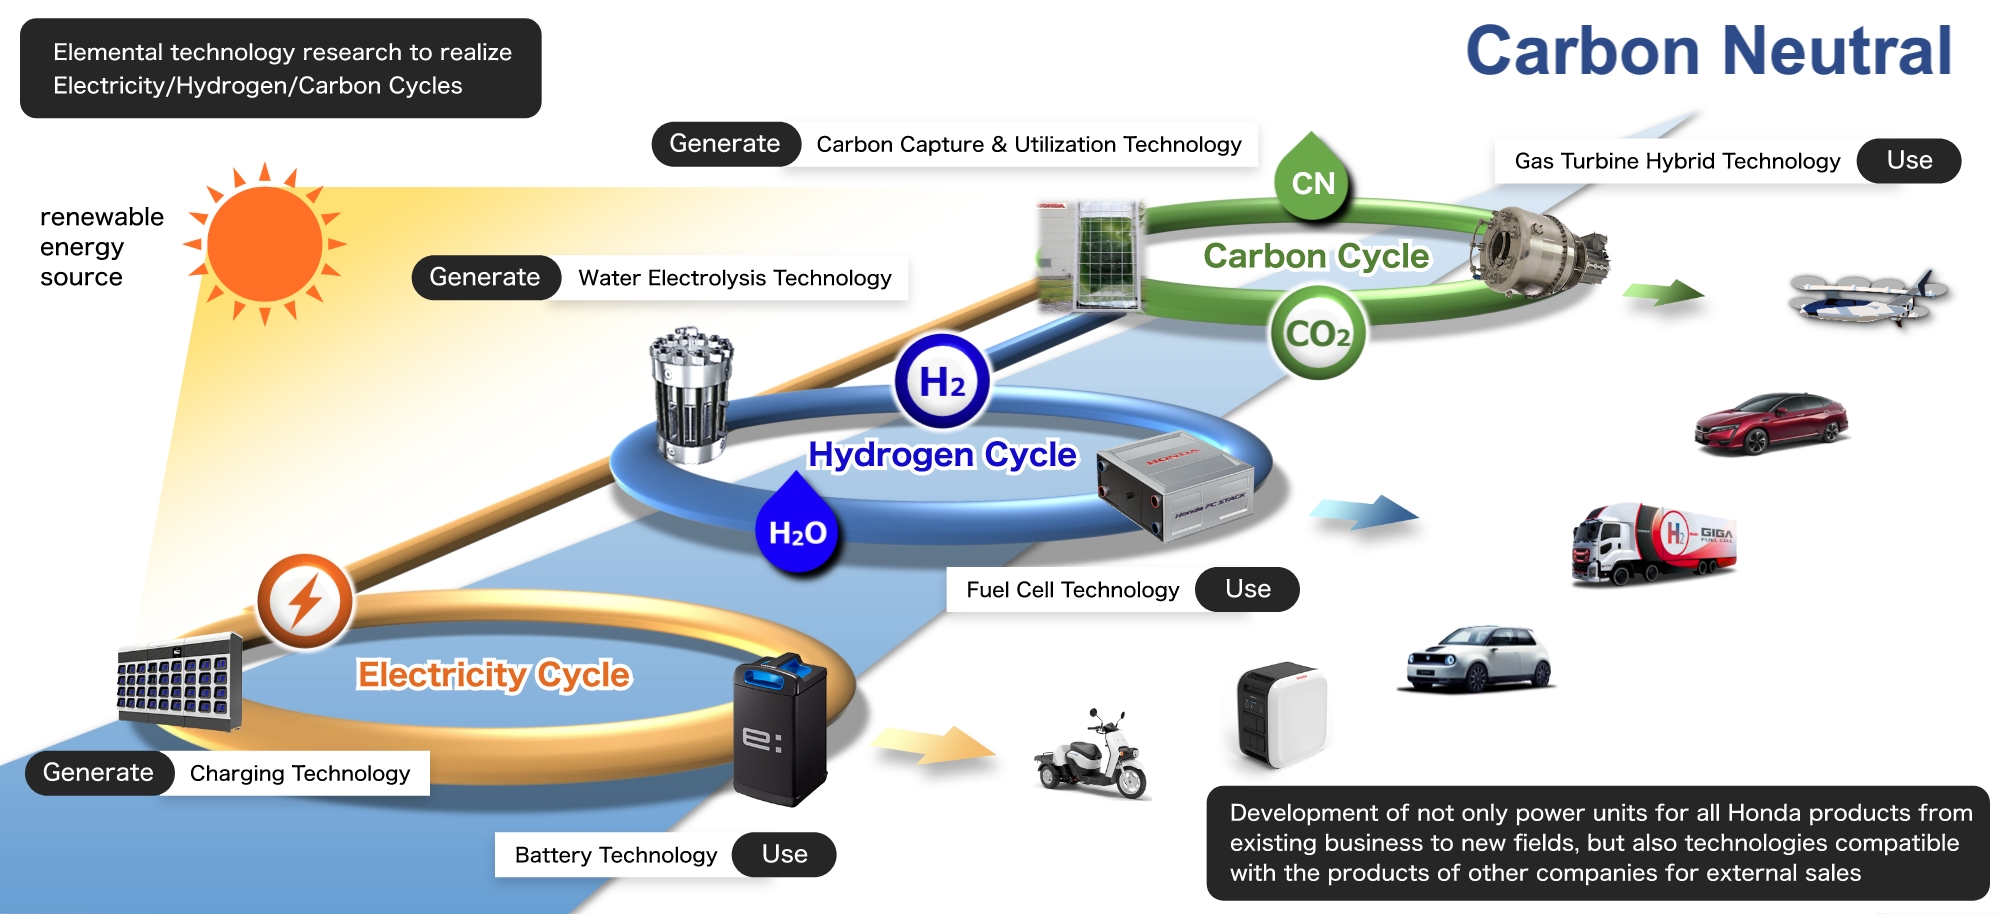 Next-generation power units and circulative energy technologies